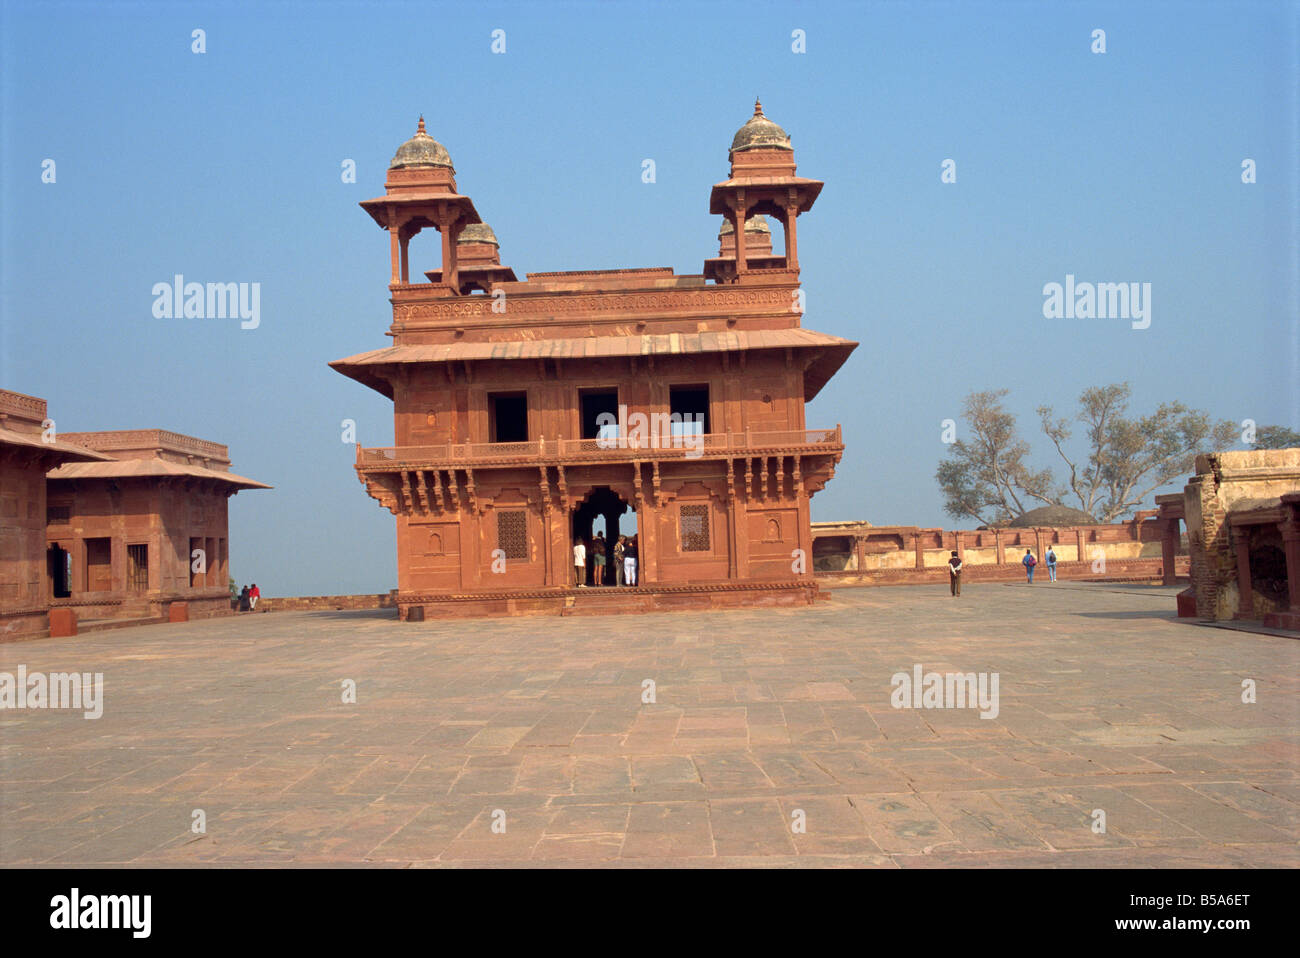 Fatehpur Sikri, built by Akbar in 1570 as his administrative capital, later abandoned, Uttar Pradesh state, India Stock Photo